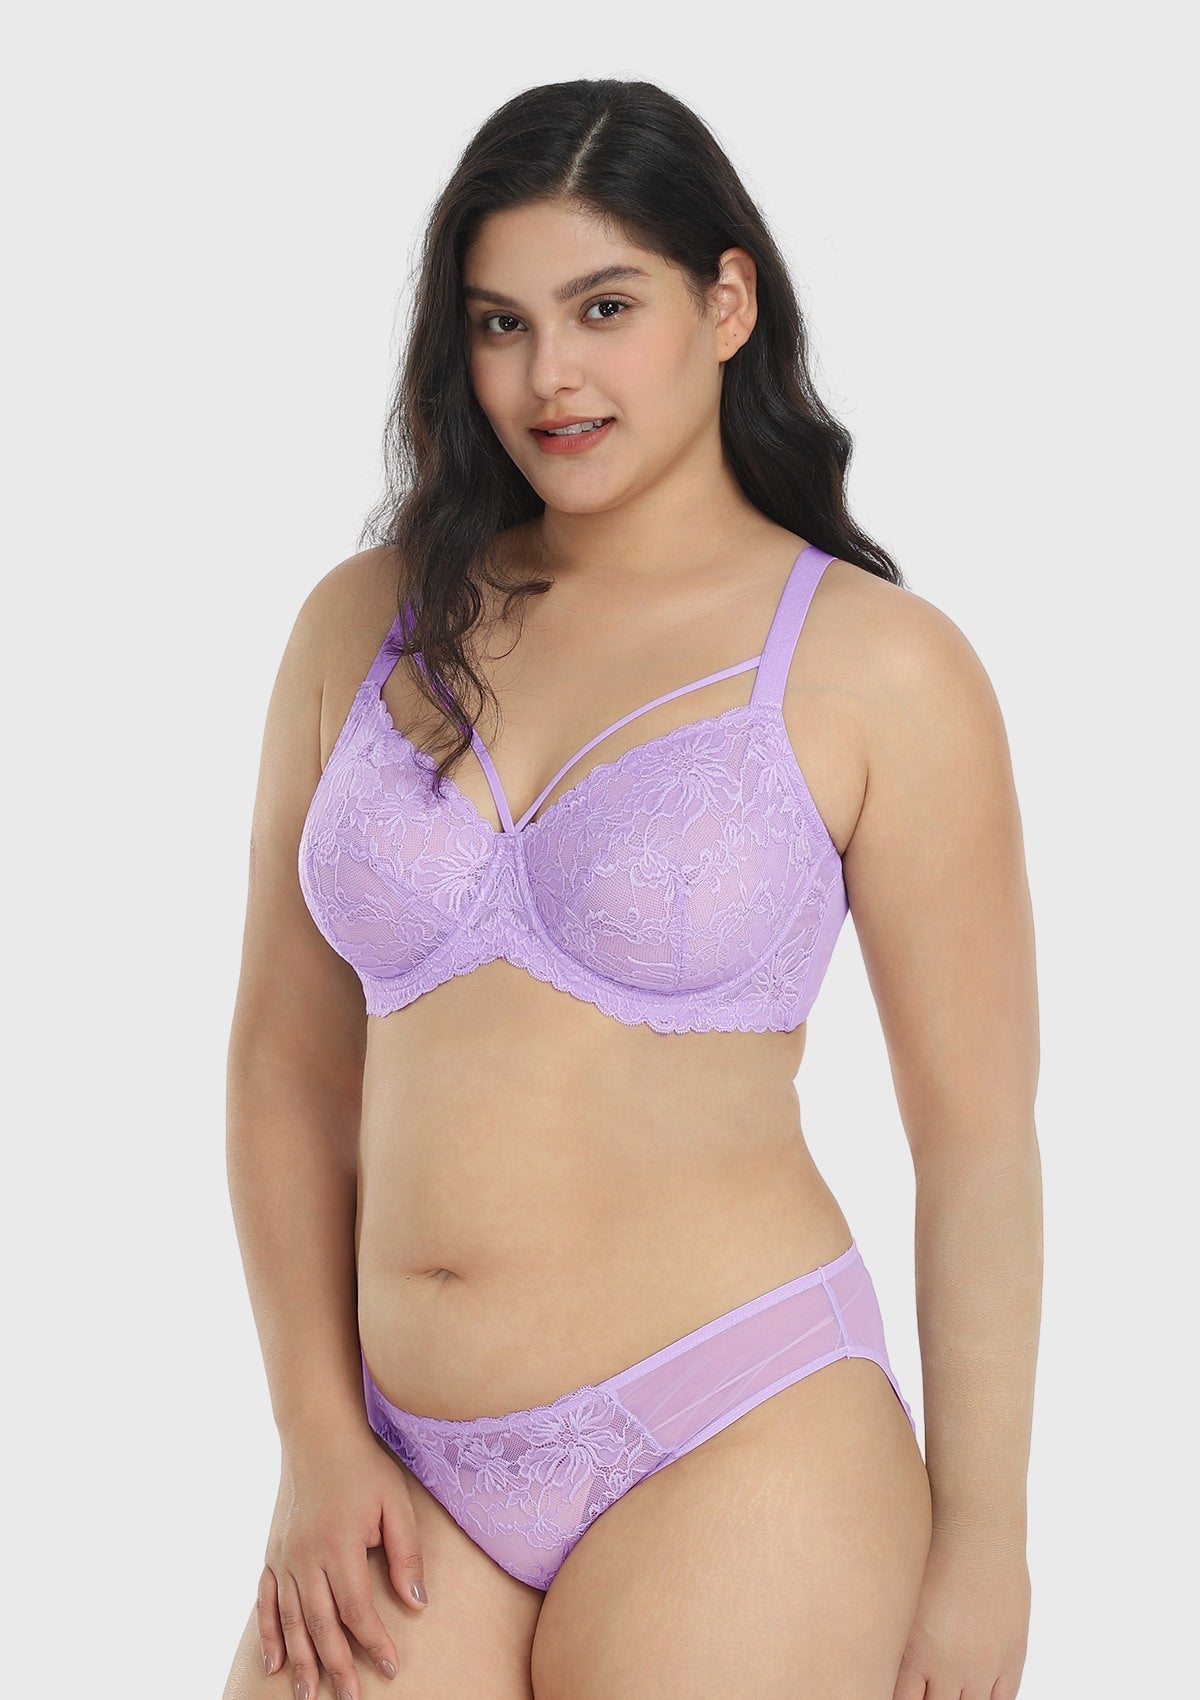 HSIA Pretty In Petals See-Through Lace Bra: Lift And Separate - Purple / 38 / D